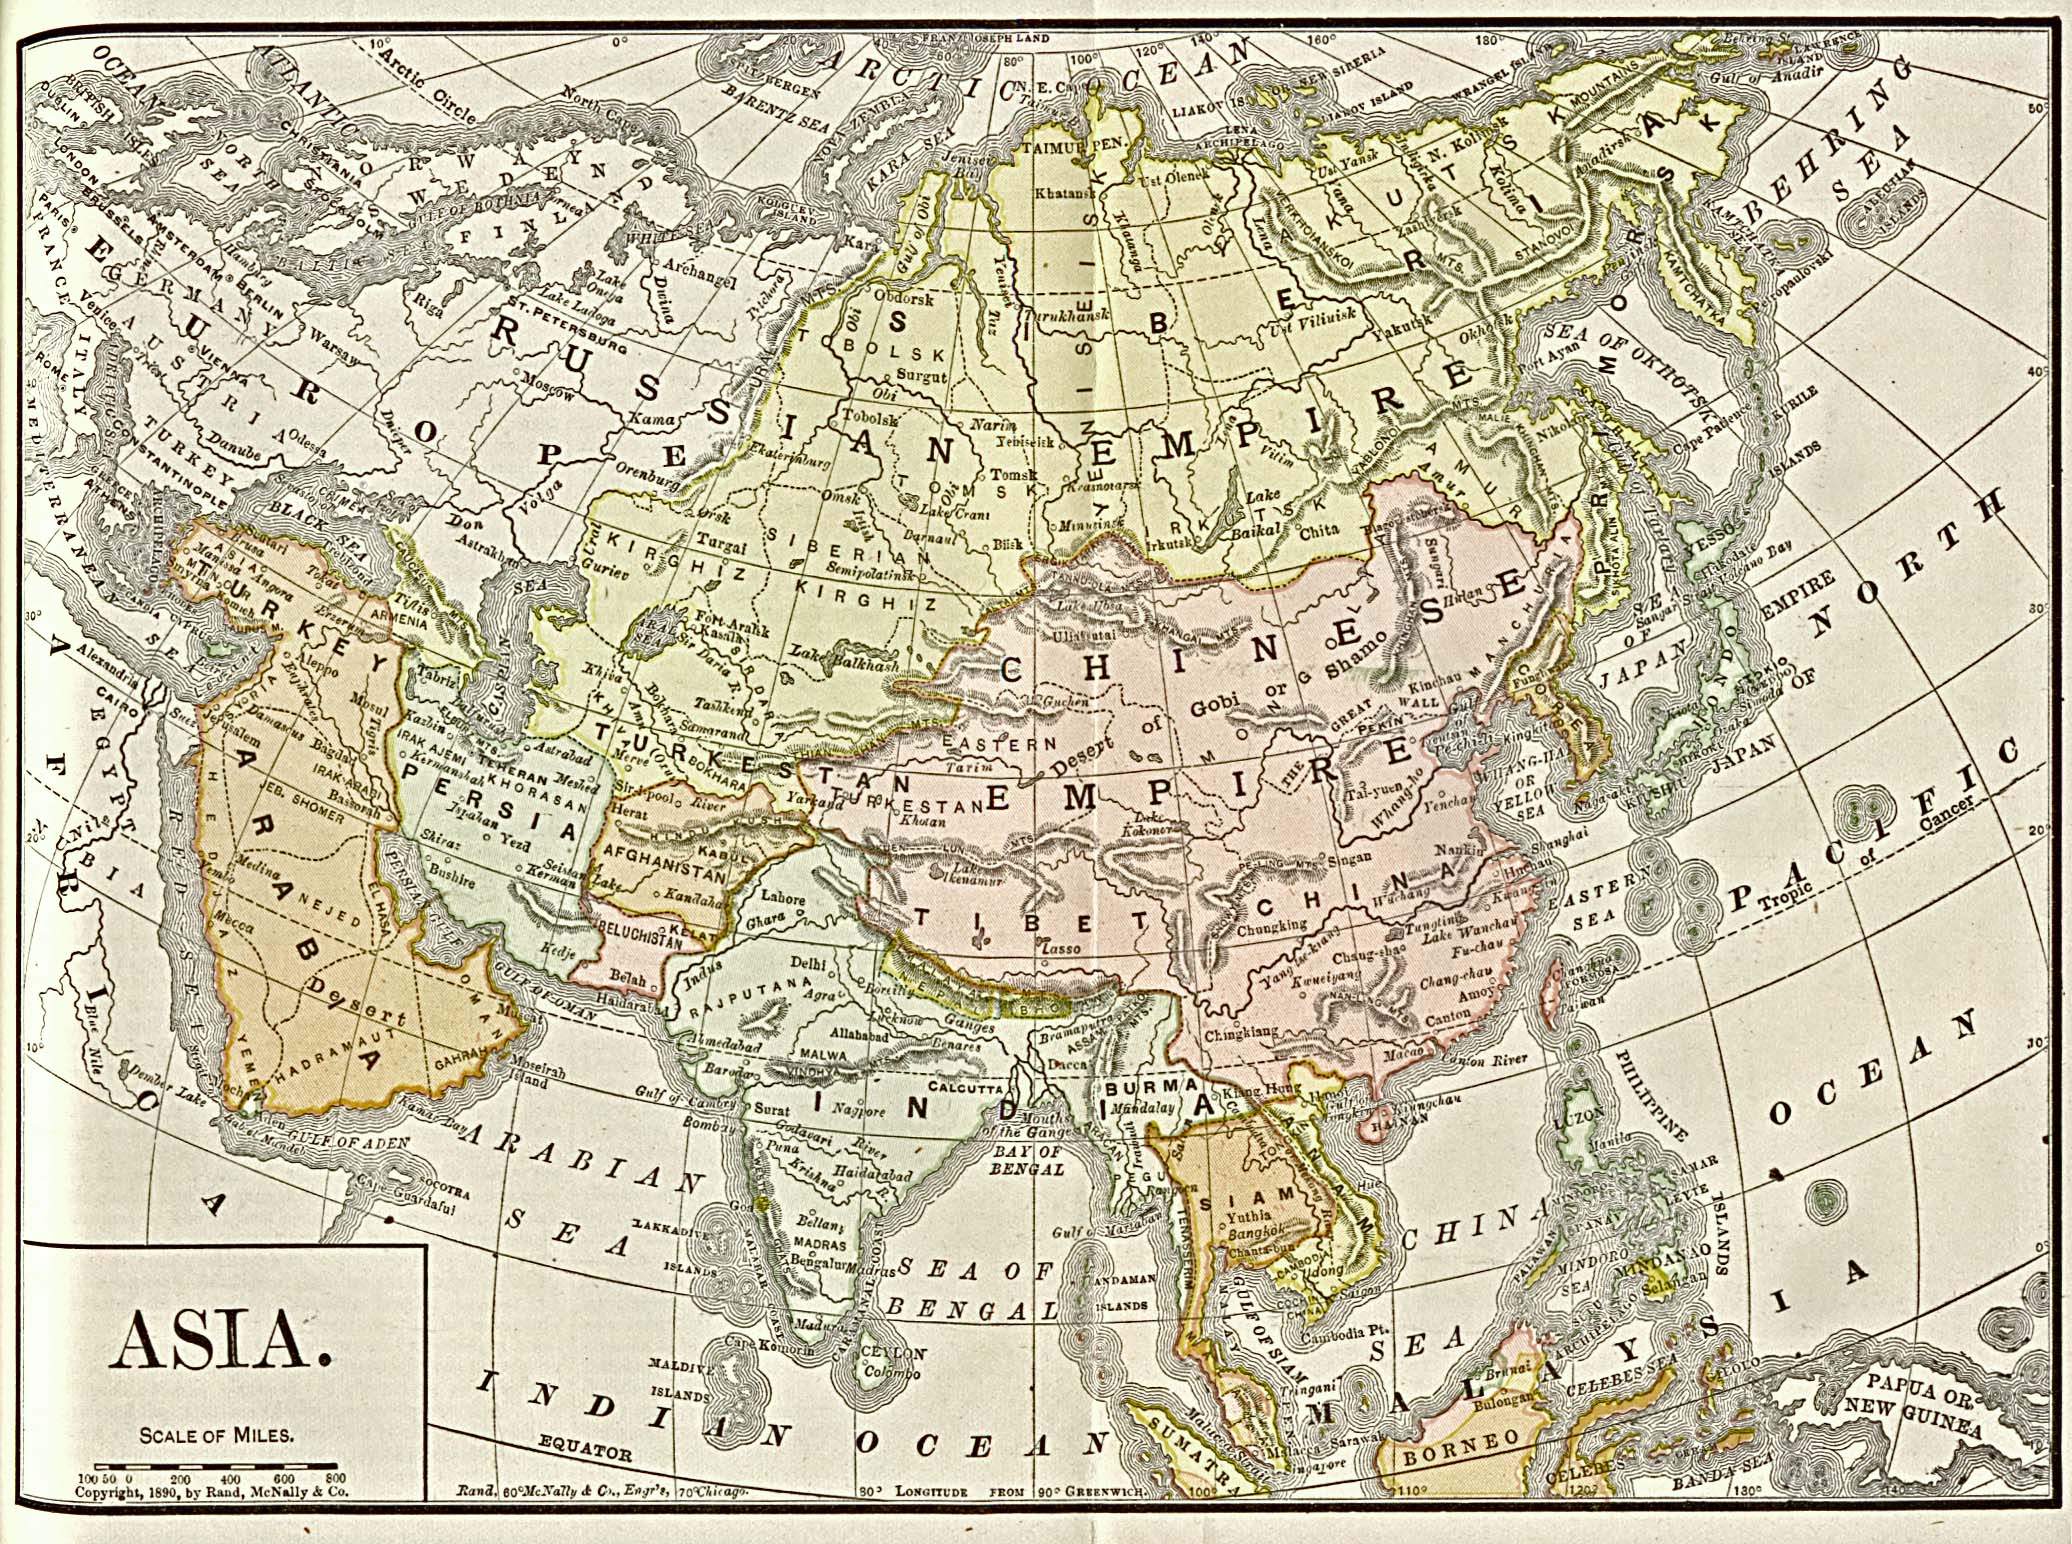 Asia Historical Maps Castañeda Map Collection Library Online